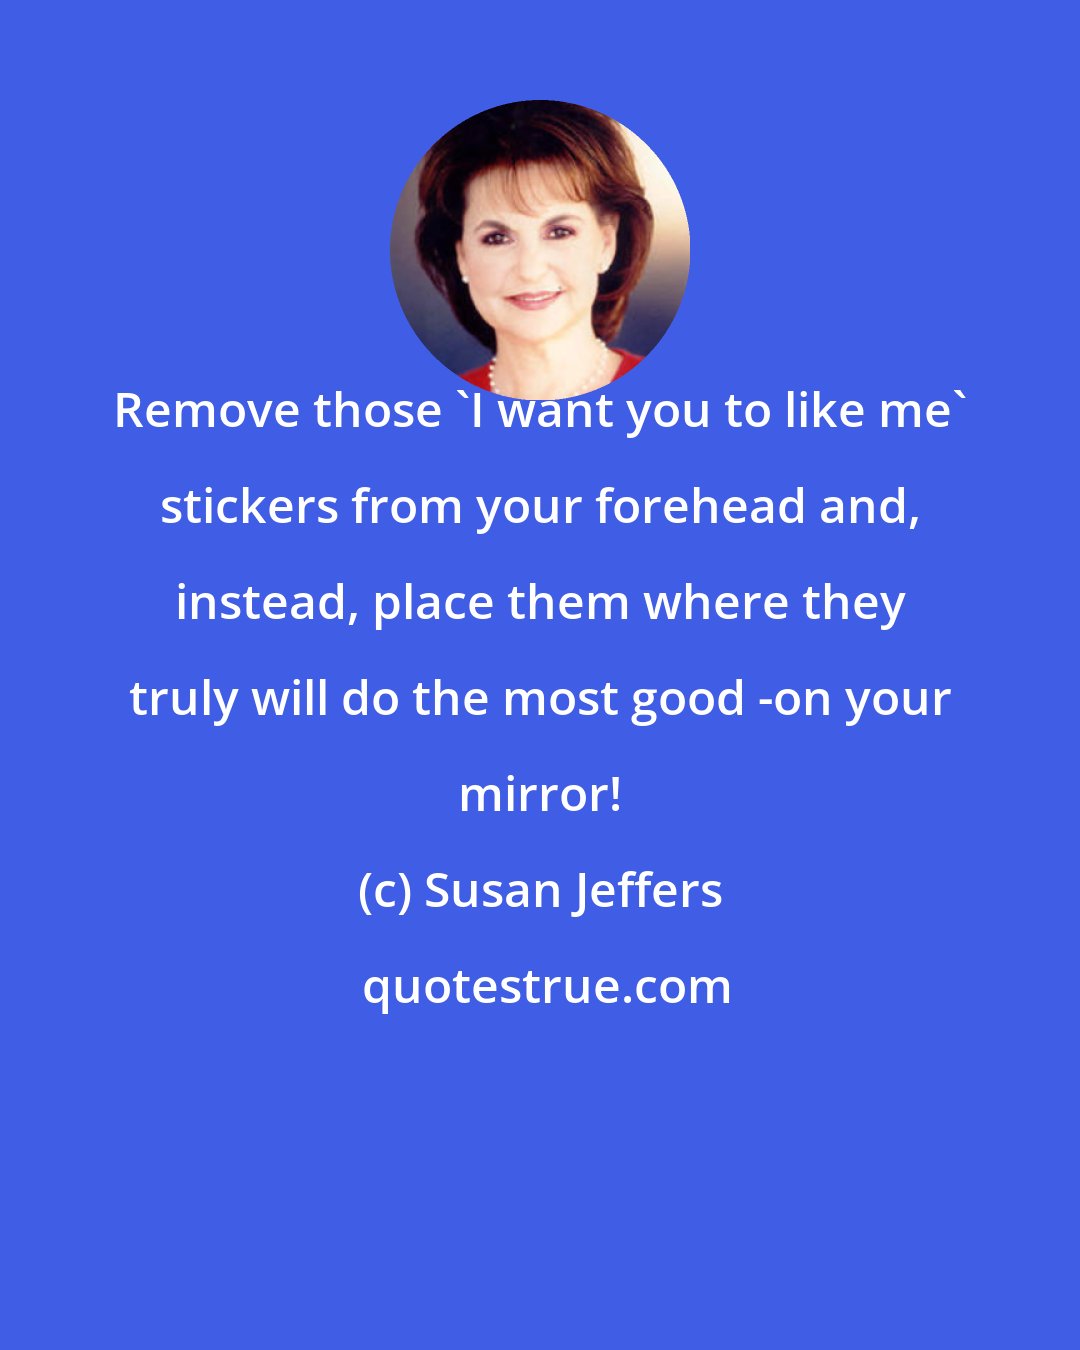 Susan Jeffers: Remove those 'I want you to like me' stickers from your forehead and, instead, place them where they truly will do the most good -on your mirror!